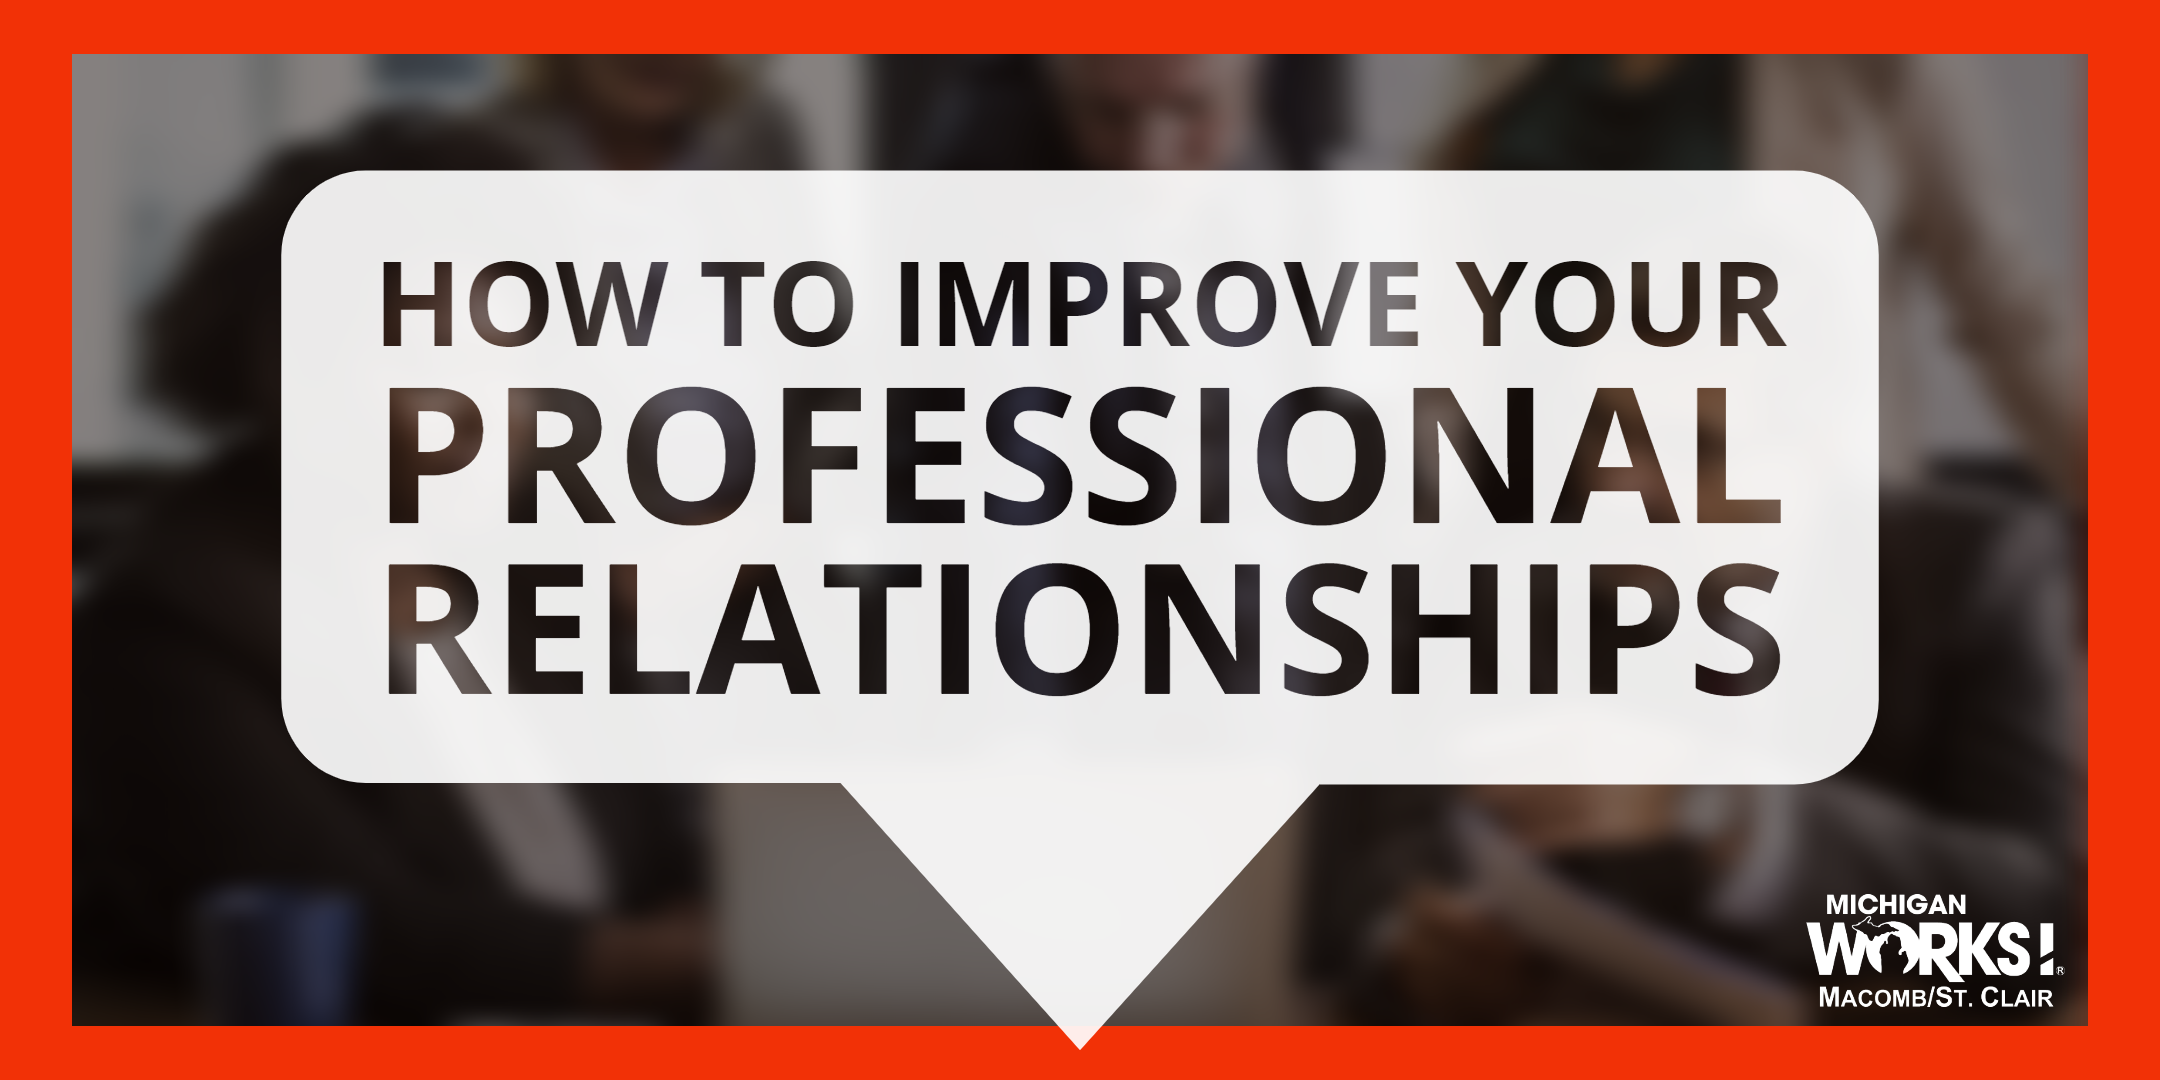 How to Improve Your Professional Relationships